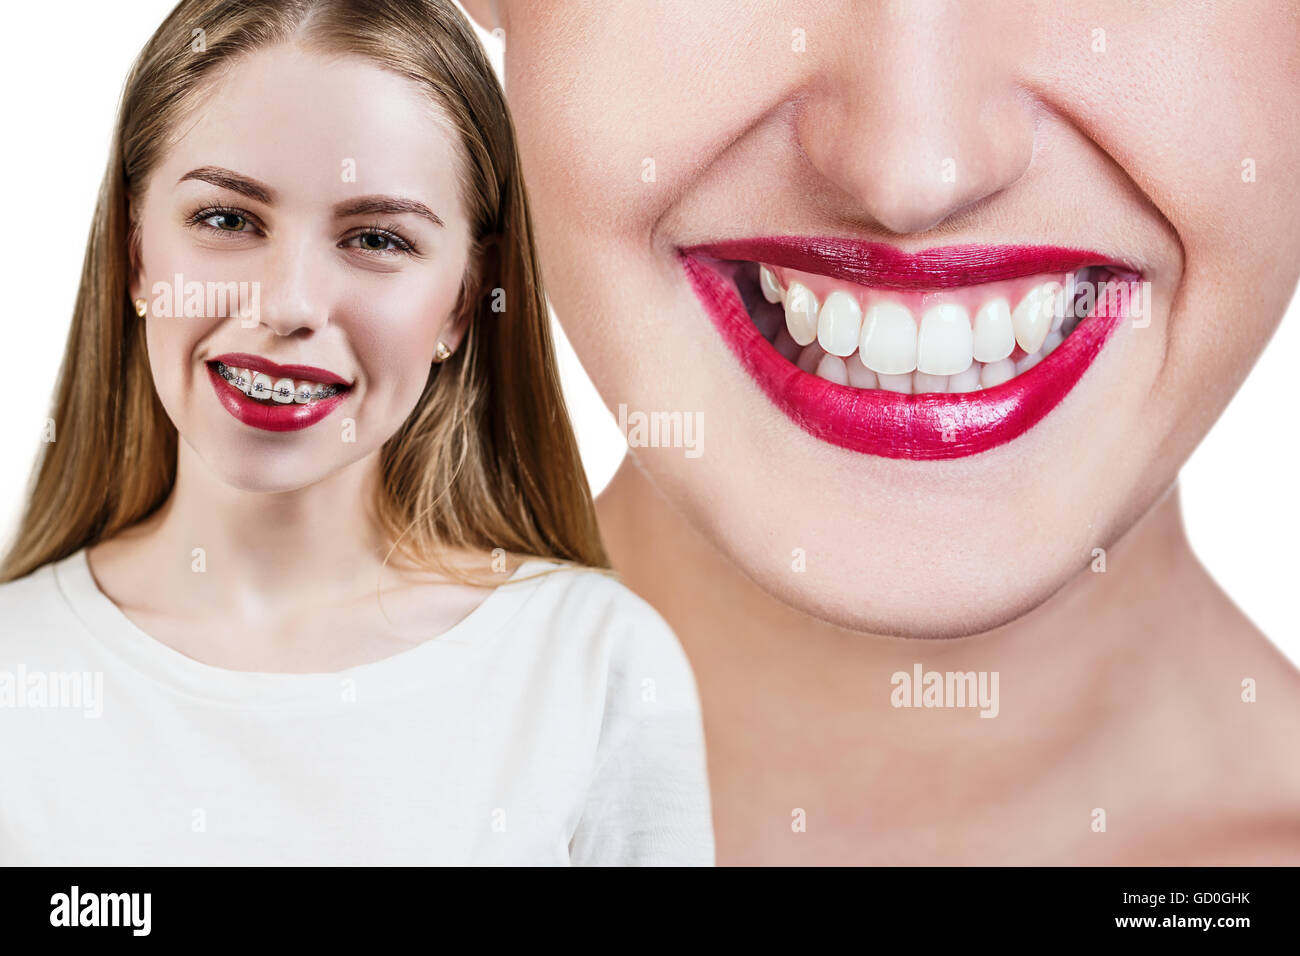 Perfect teeth before and after braces Stock Photo